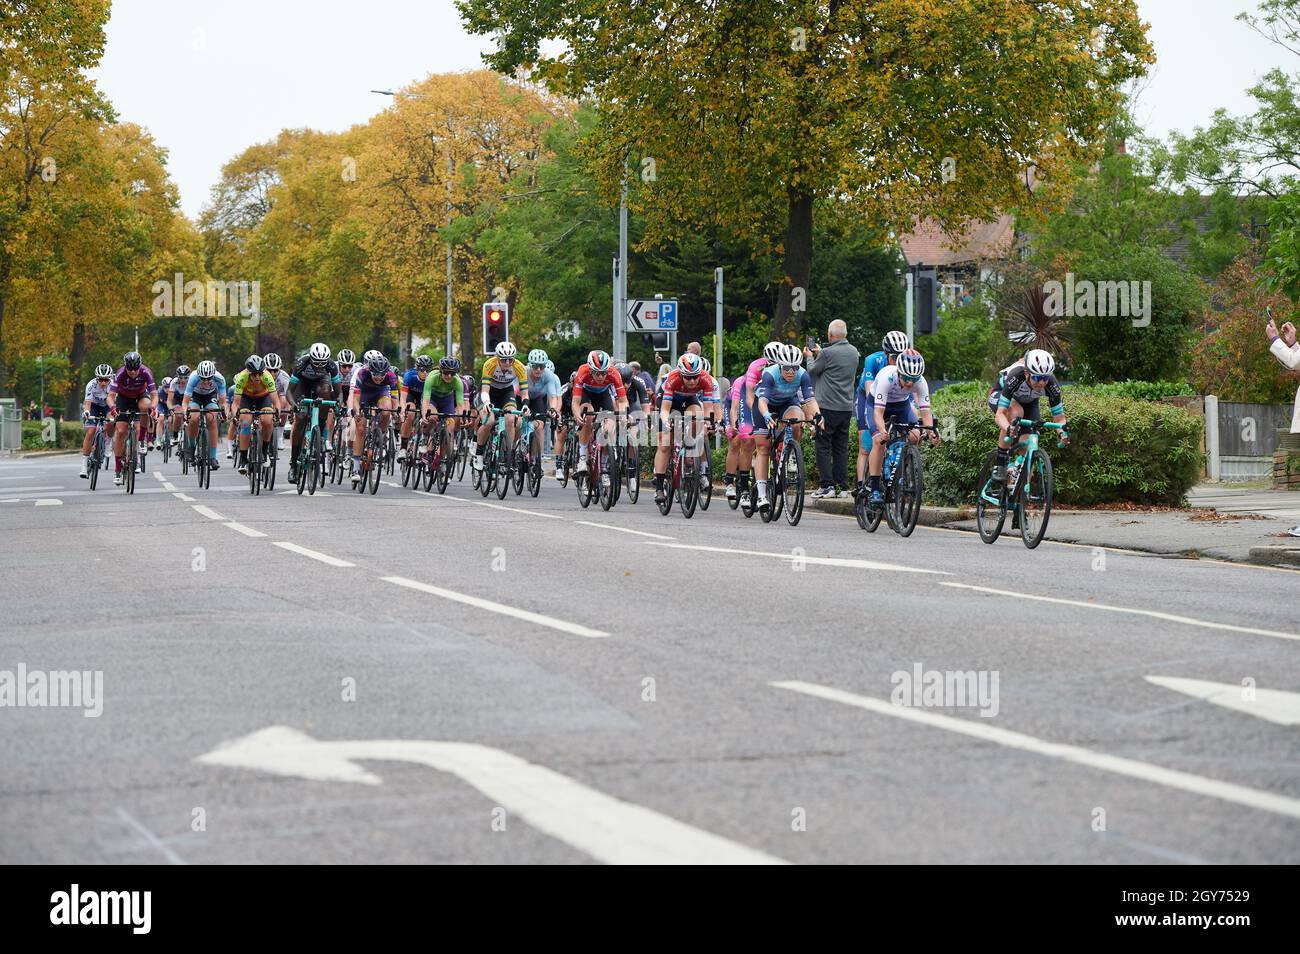 Southend-on-Sea, Essex, UK, 7th October 2021, Women’s Cycling Tour 2021 - stage 4, Chalkwell Avenue. Terry Mendoza Credit: Terence Mendoza/Alamy Live News Stock Photo